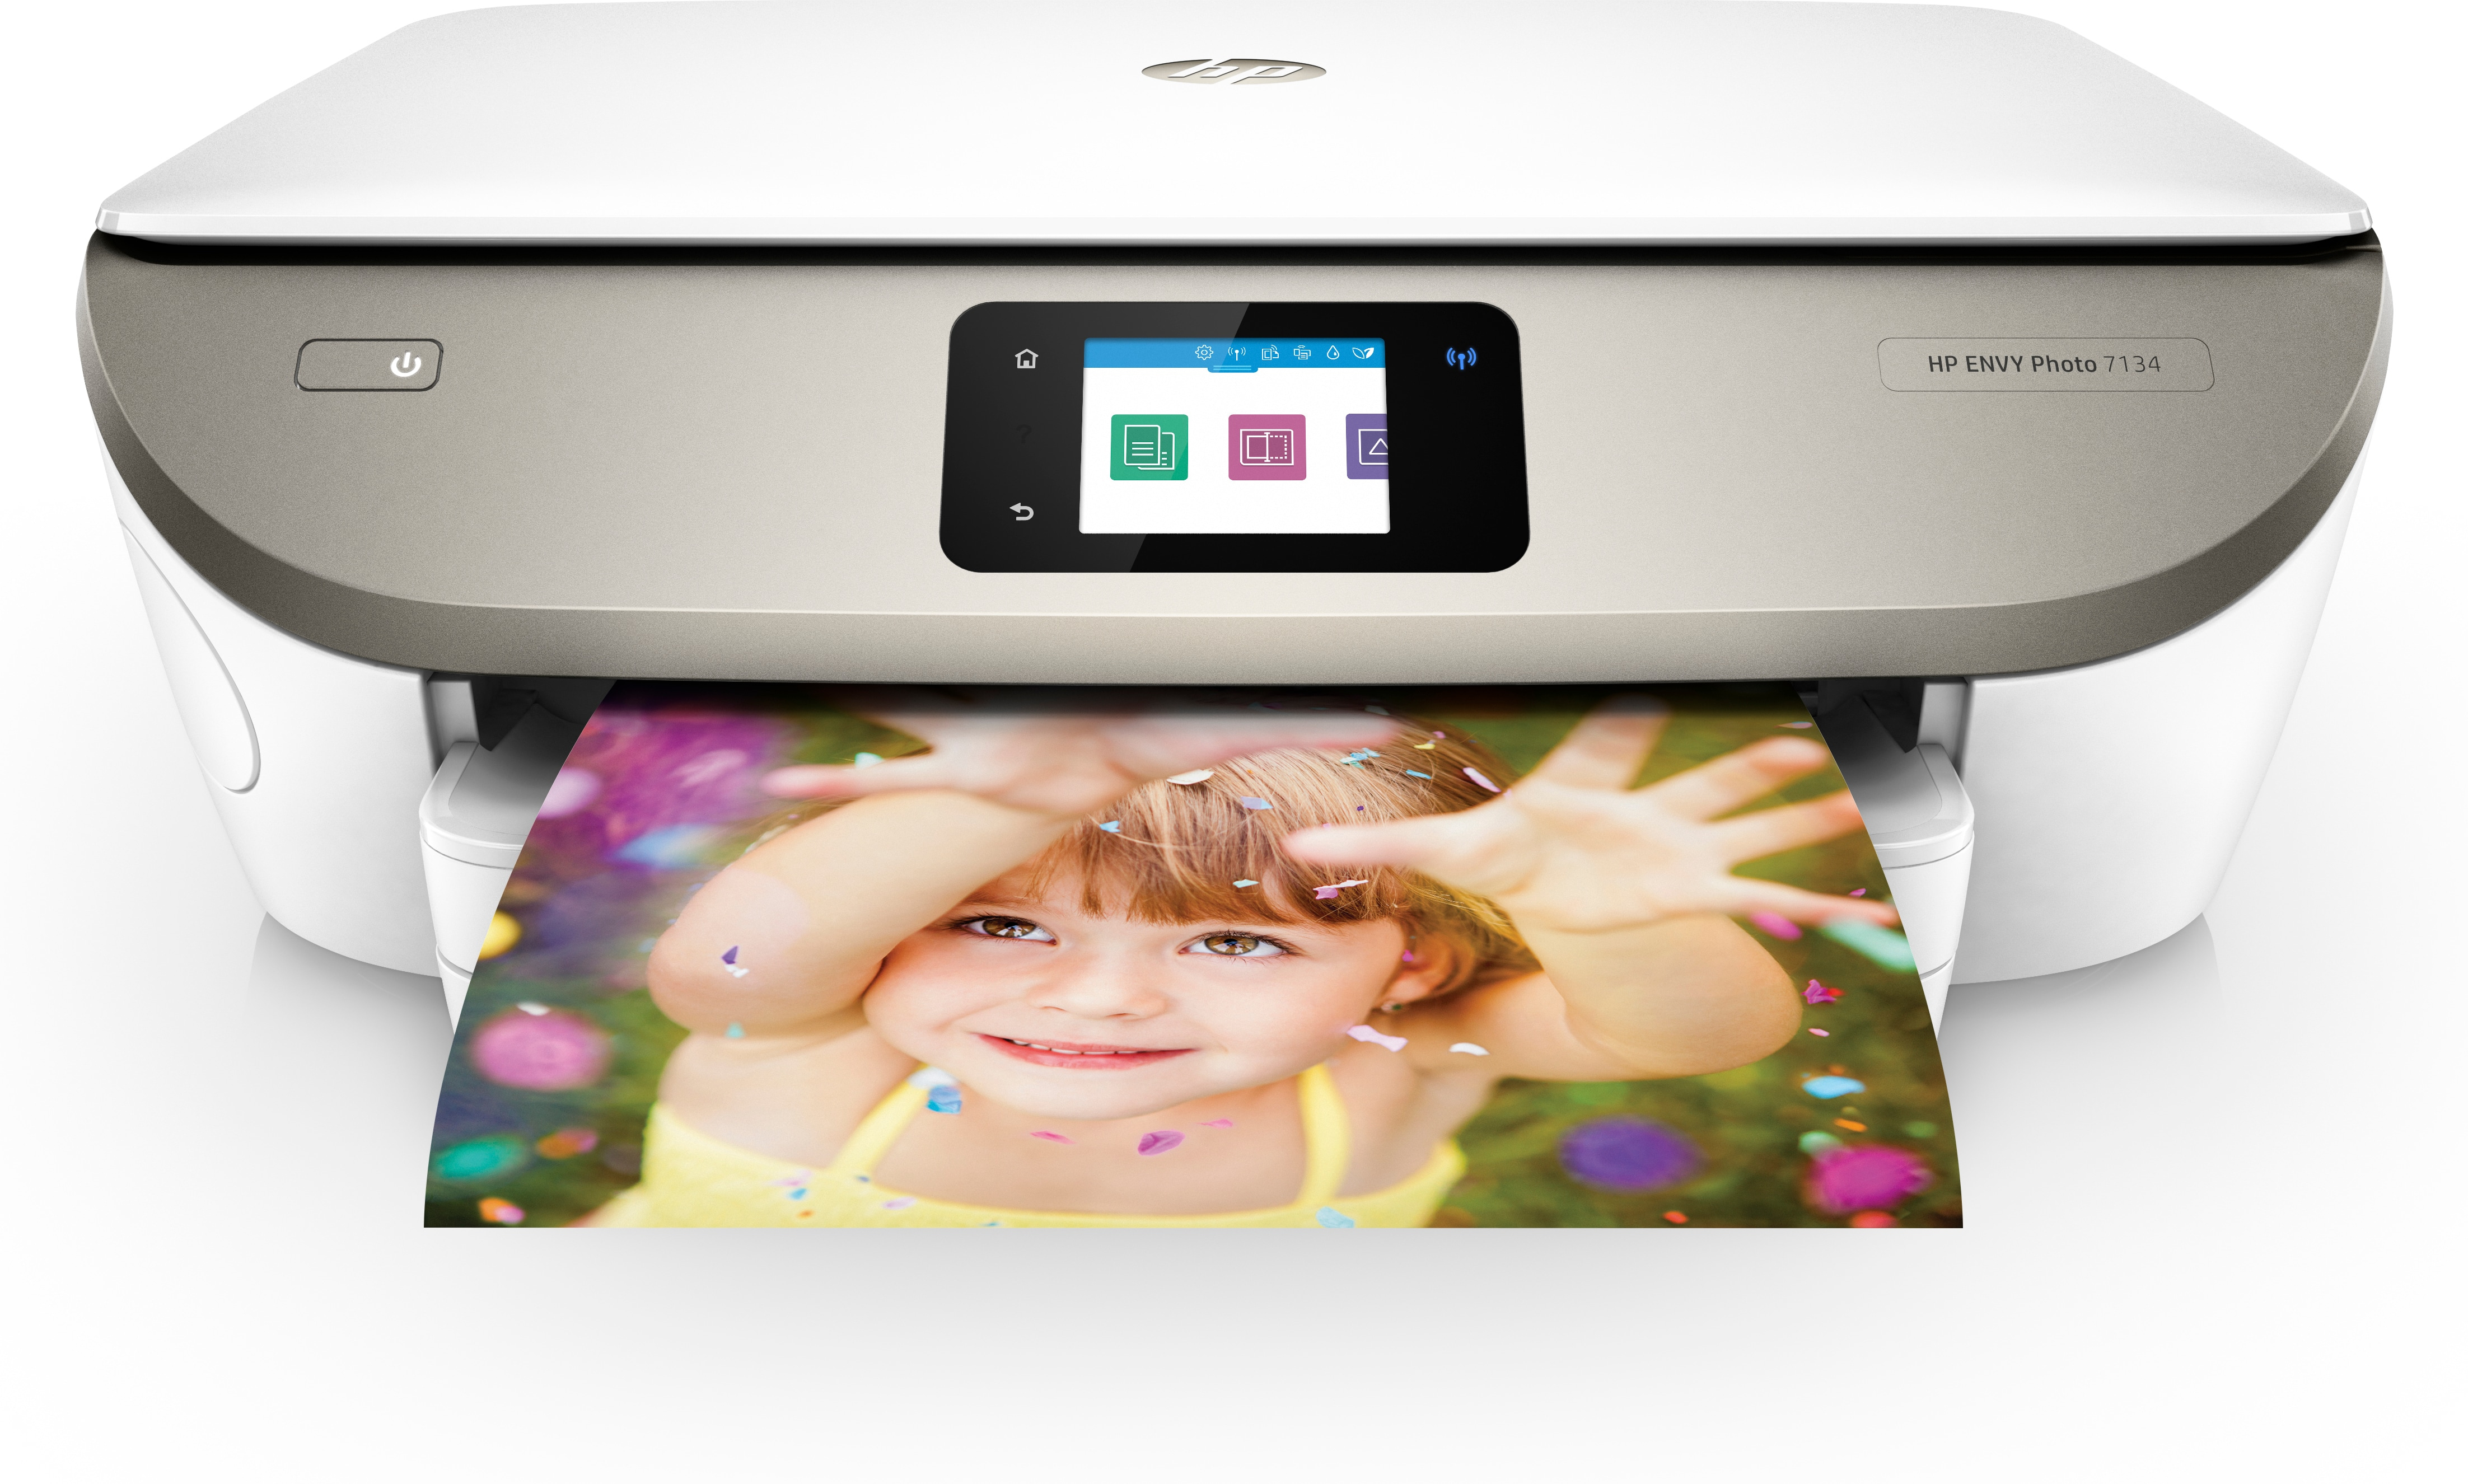 HP Envy Photo 7134 All-in-One - Multifunktionsdrucker - Farbe - Tintenstrahl - 216 x 297 mm (Original)